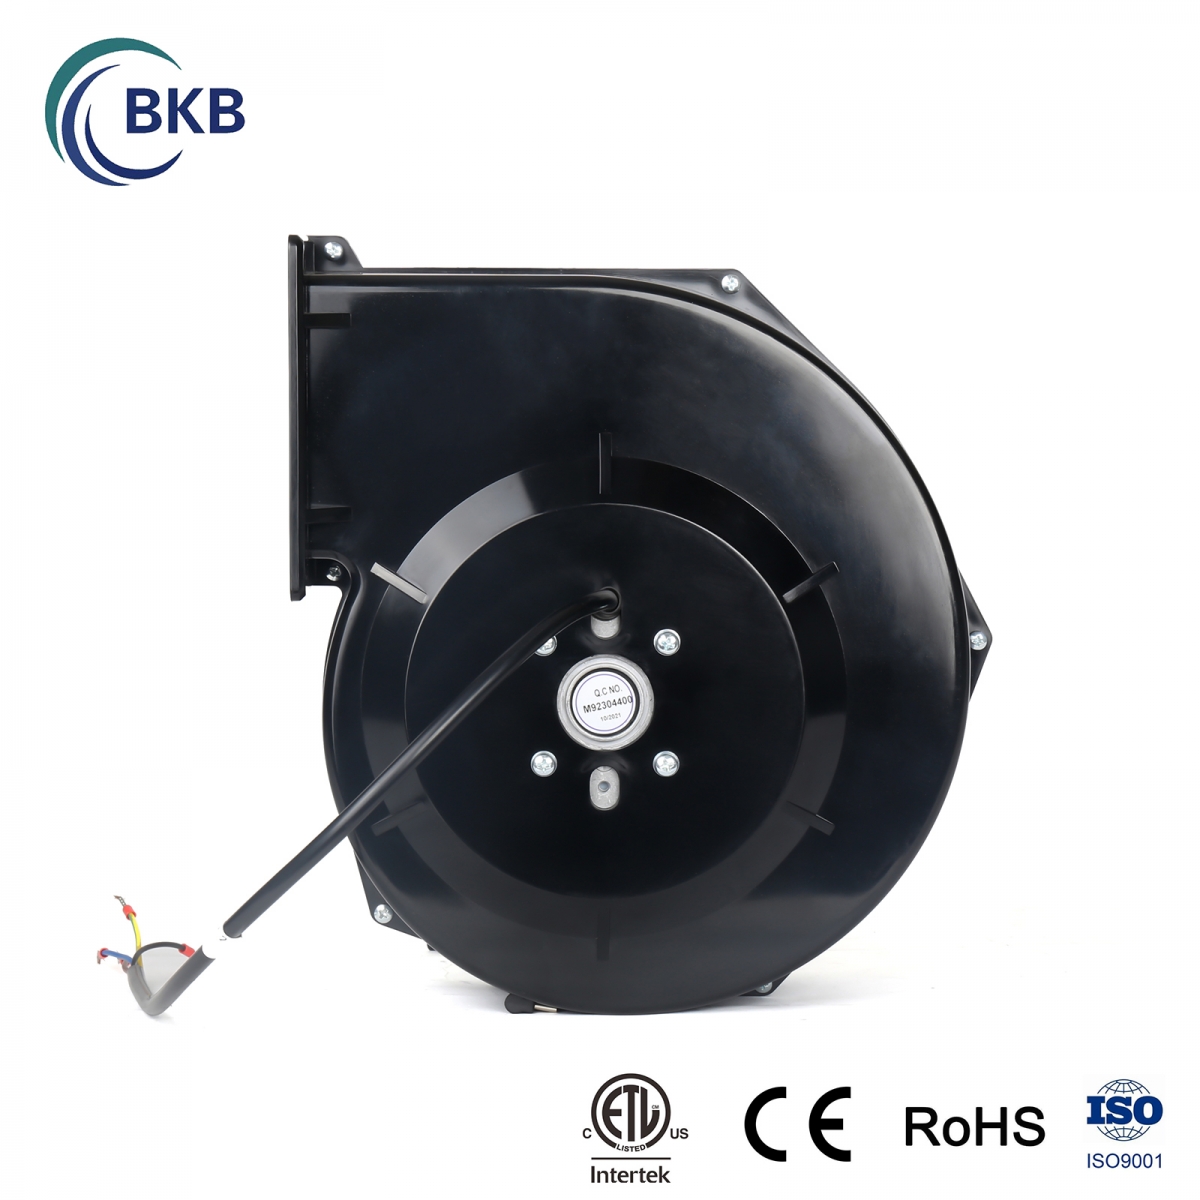 Applications – Outer rotor type  single inlet sirocco fans-SUNLIGHT BLOWER,Centrifugal Fans, Inline Fans,Motors,Backward curved centrifugal fans ,Forward curved centrifugal fans ,inlet fans, EC fans